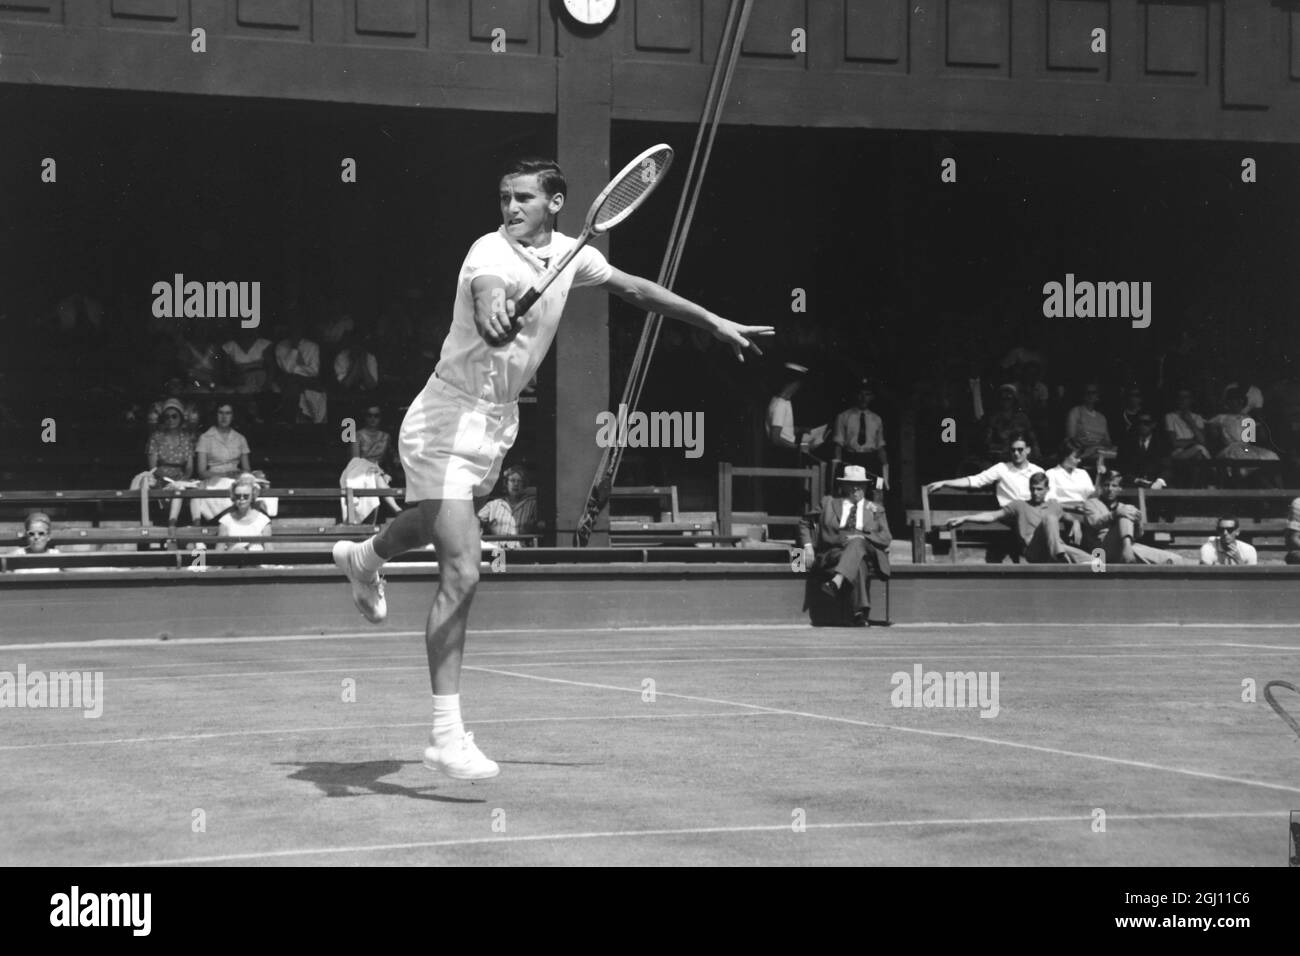 AUSTRALIAN PLAYER ROY EMERSON IN ACTION AT WIMBLEDON TENNIS CHAMPIONSHIPS 30 JUNE 1961 Stock Photo